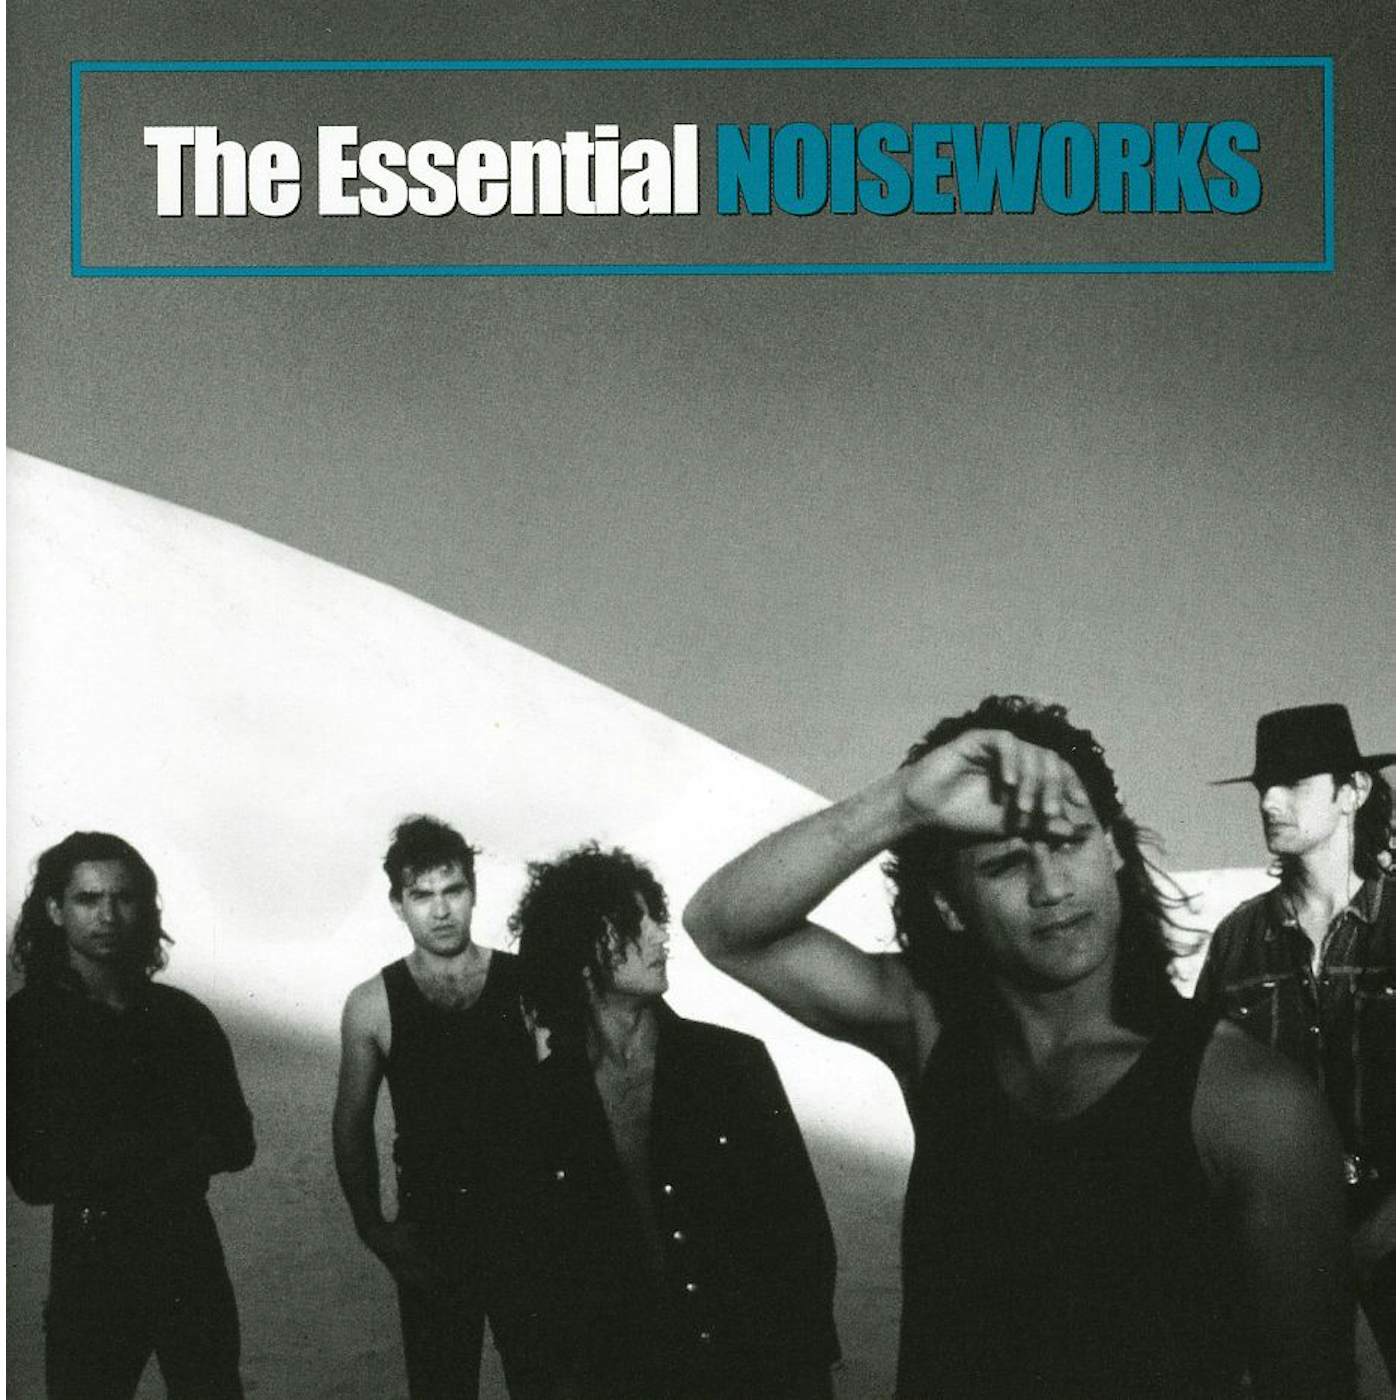 Noiseworks ESSENTIAL CD